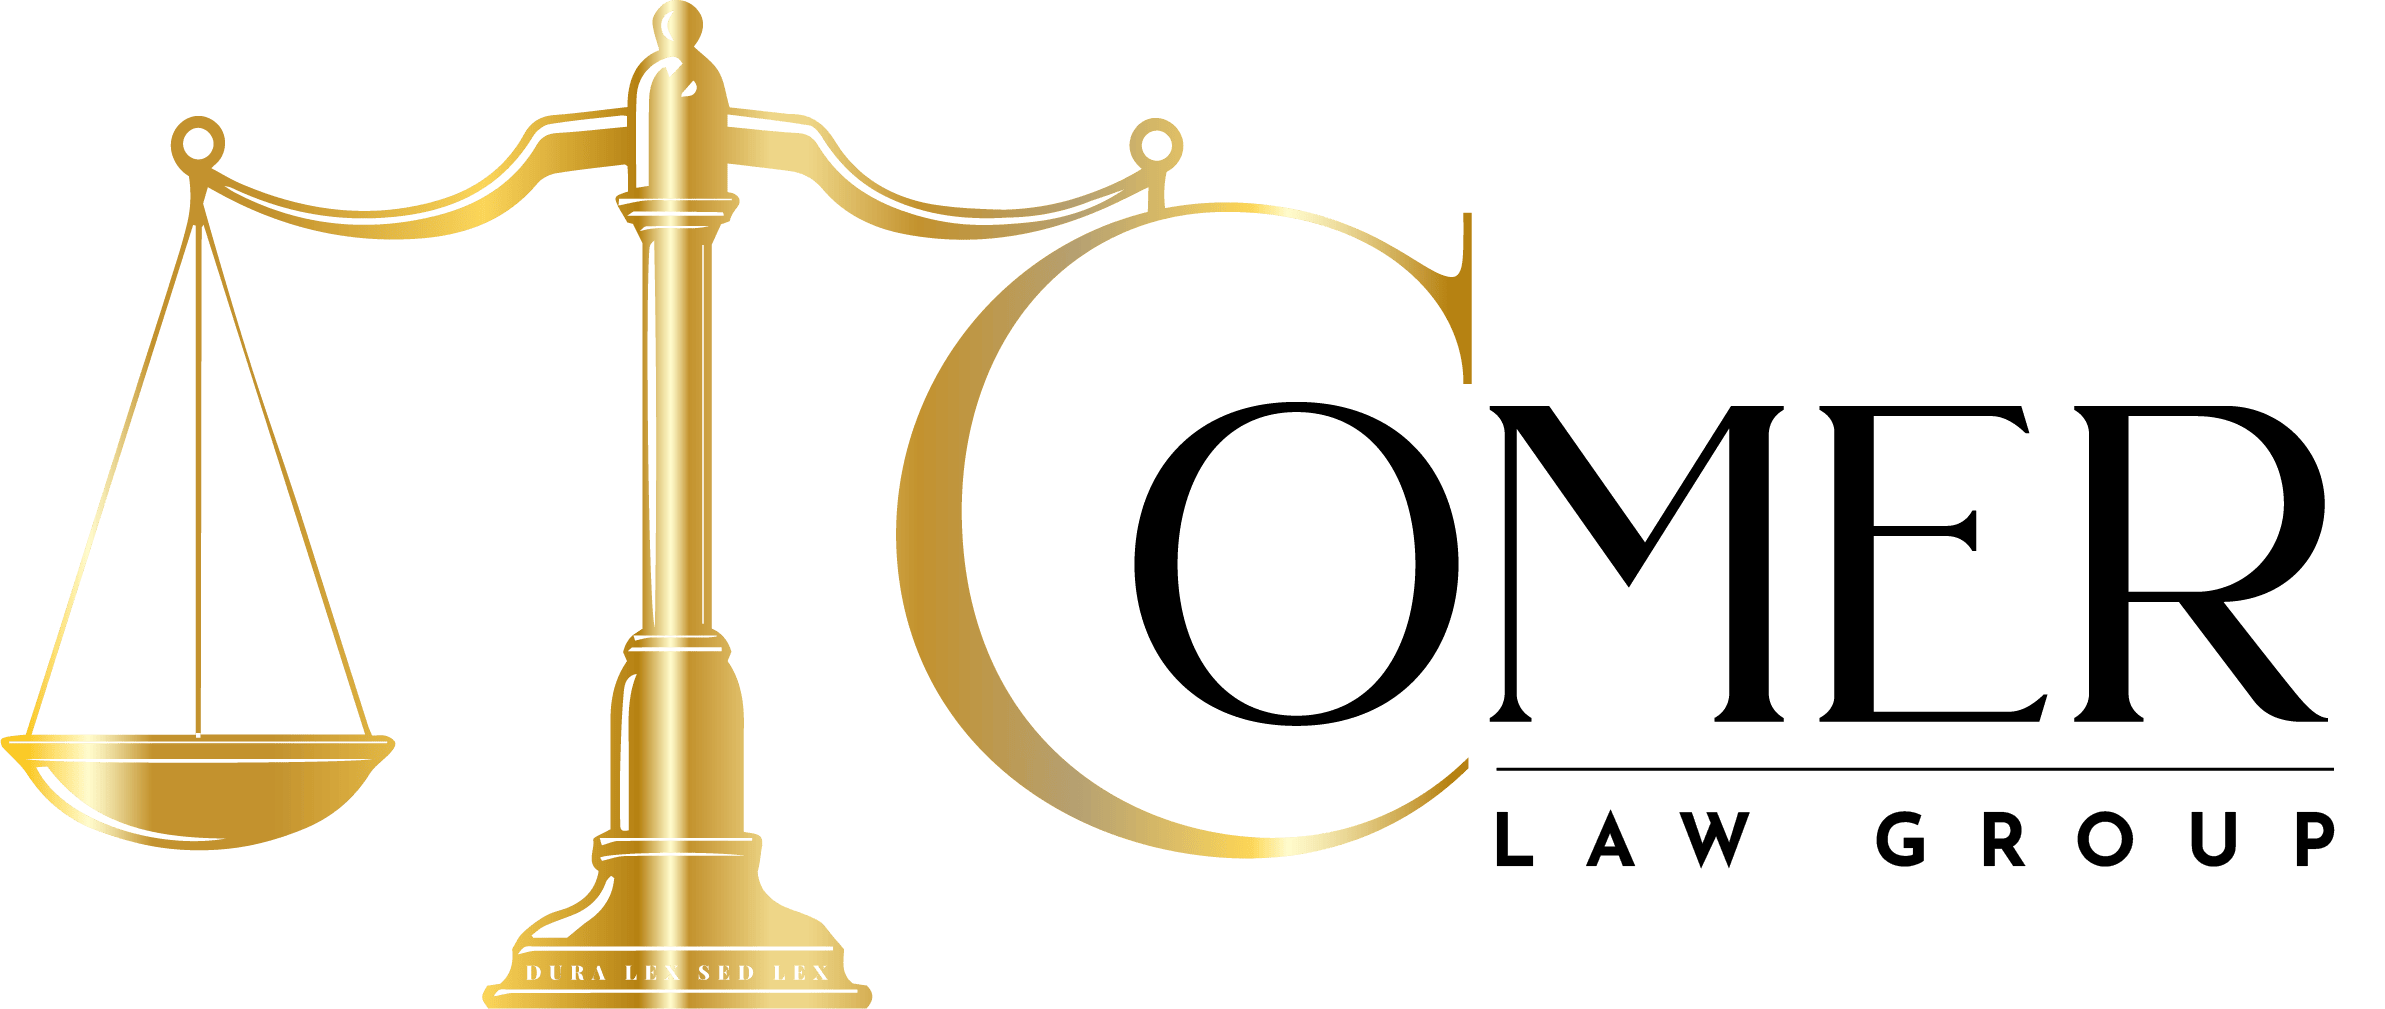 Comer Law Group Black